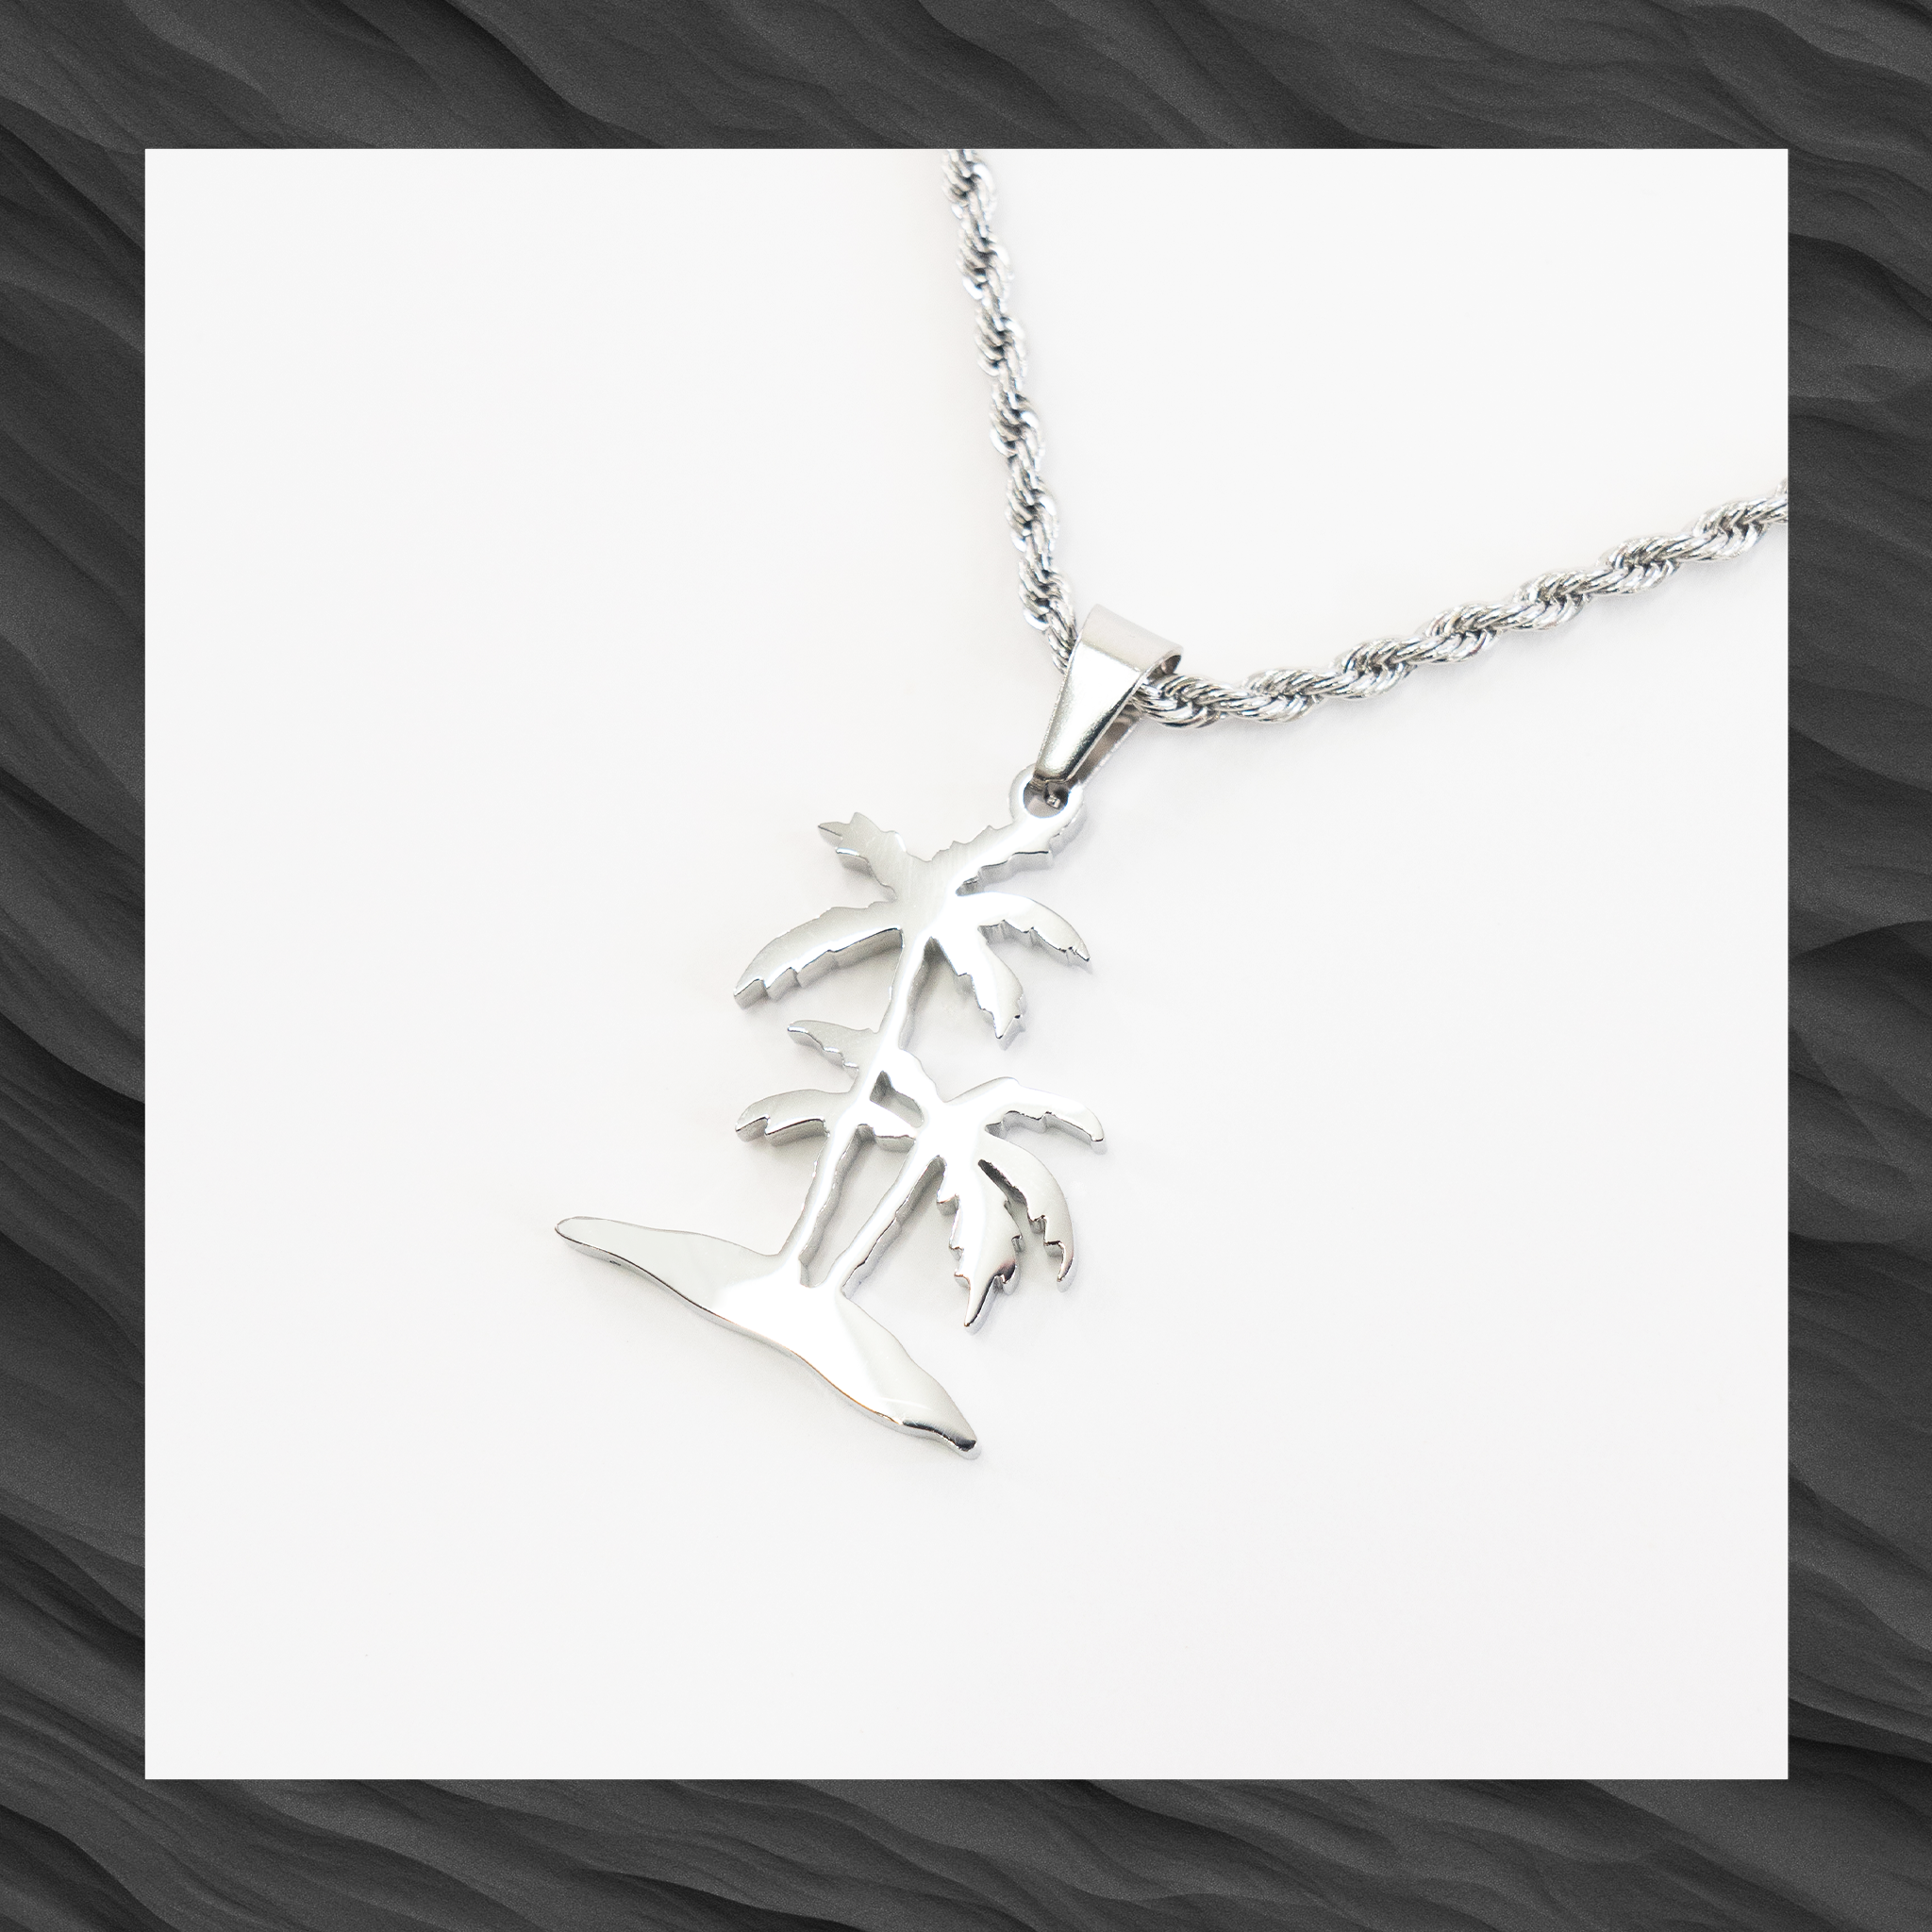 TST PALM TREE NECKLACE PRE-ORDER